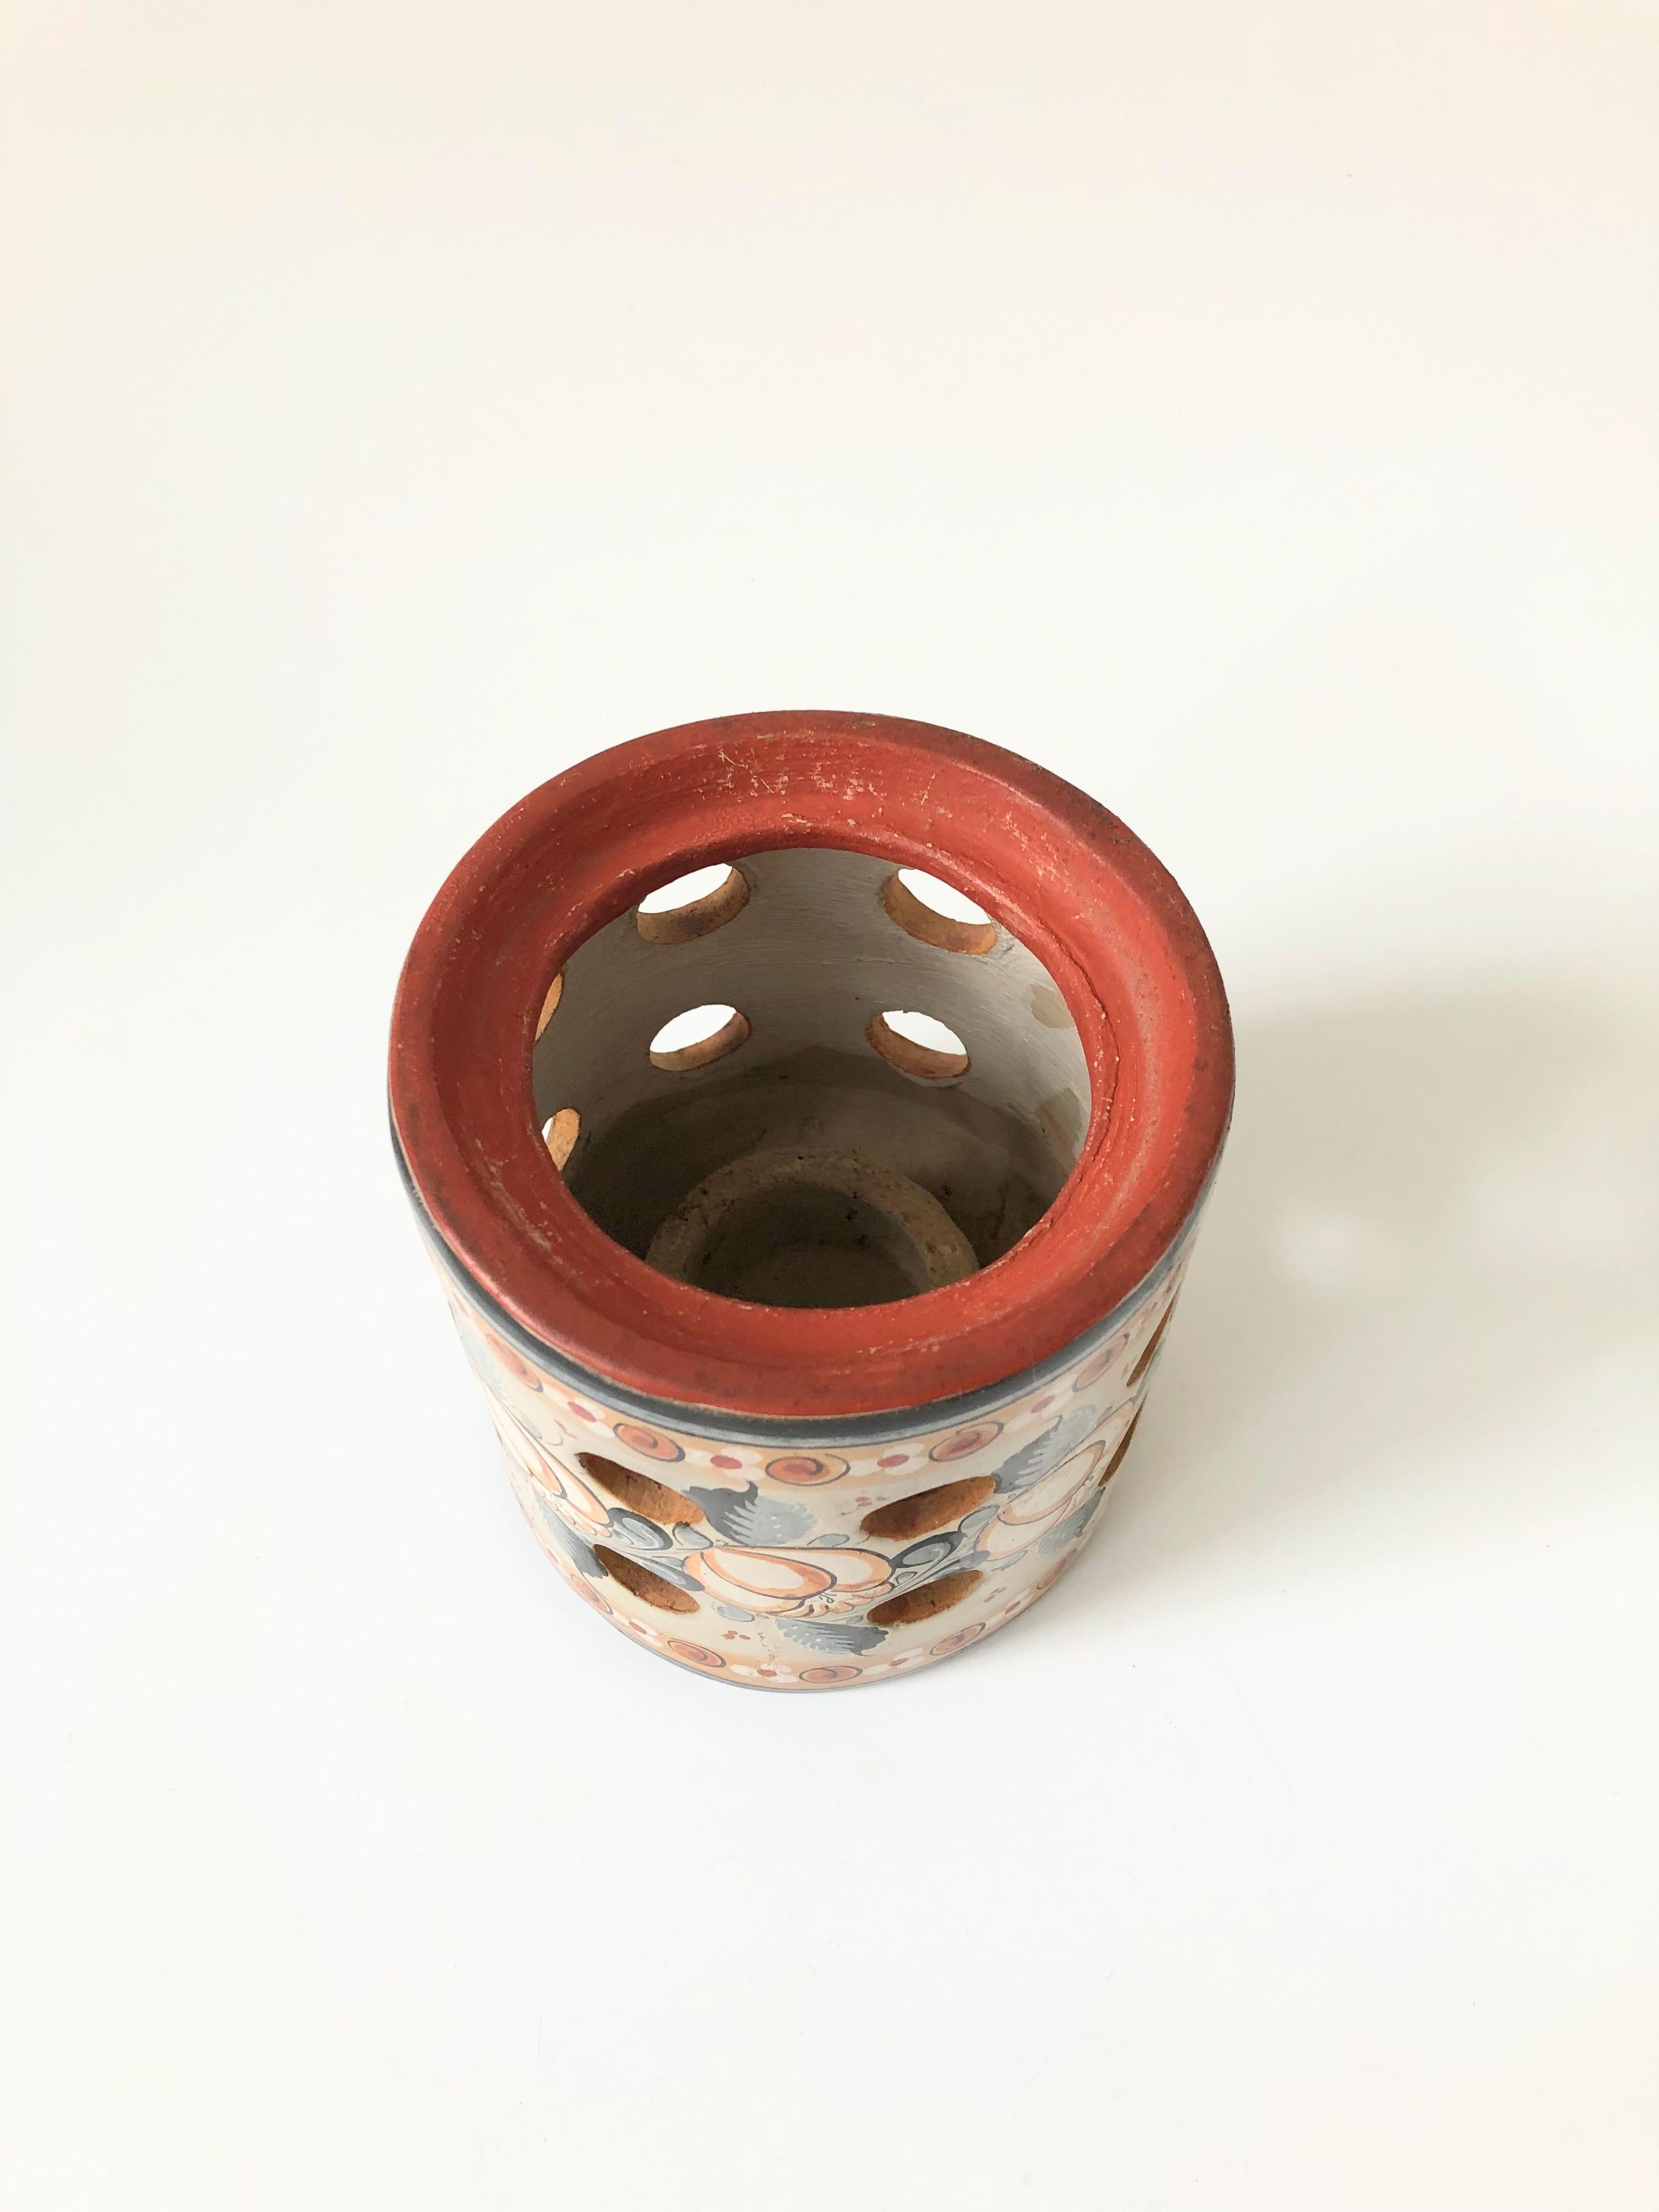 A vintage Mexican Folk Art tonala pottery candle holder. Beautiful hand painted designs wrap around the sides with circular cutouts for letting out the light. A circle is formed in the center for placing a votive candle.
 